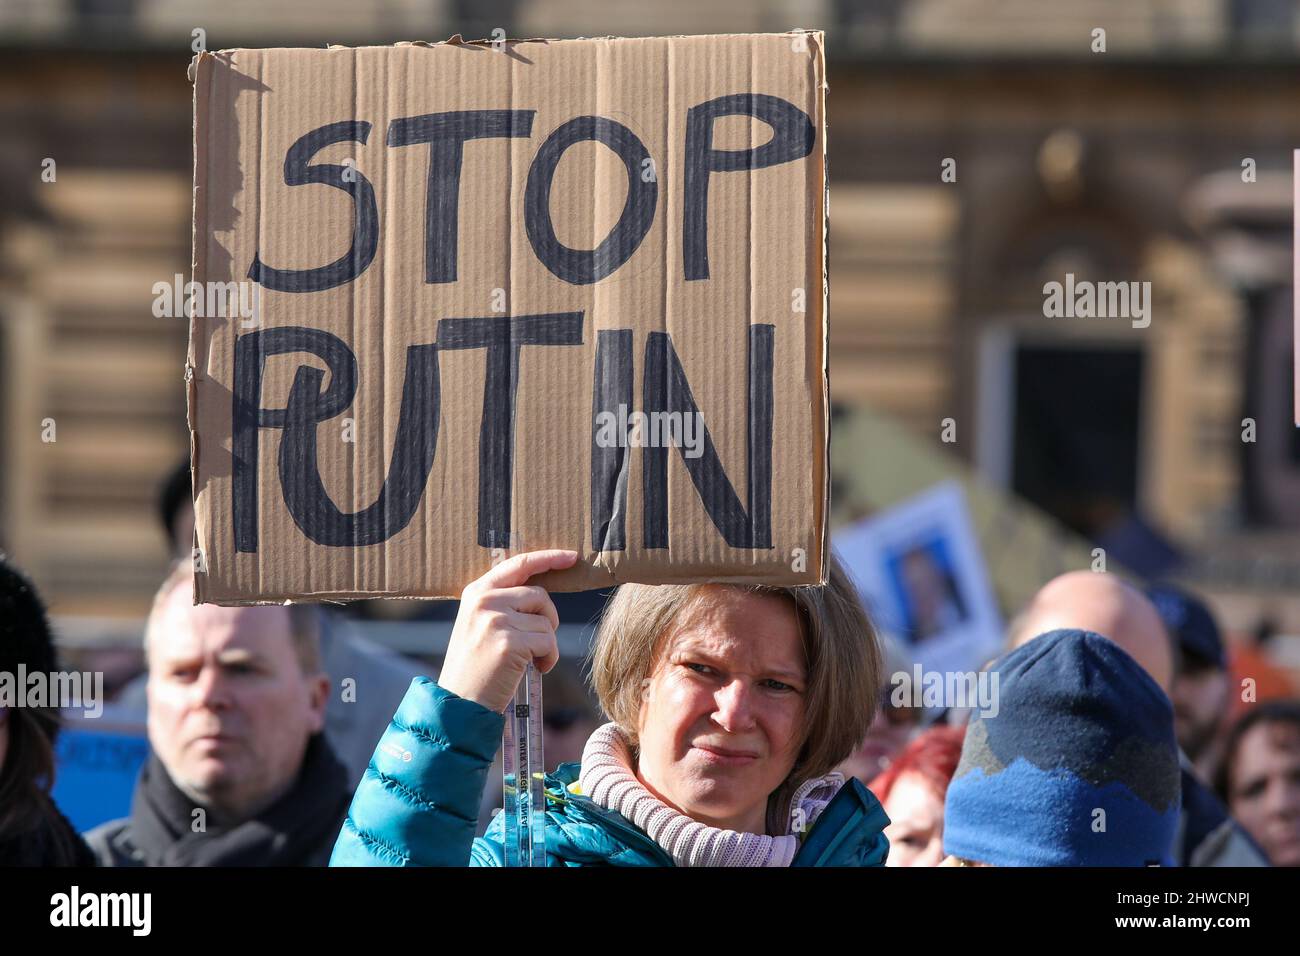 Glasgow, UK. 05th Mar, 2022. Several hundred people turned out in George Square, Glasgow to show solidarity and support for Ukraine and demand that Russia stop the war and invasion of that country. Local politicians, including SUSAN AITKEN, leader of Glasgow City council addressed the assembled crowd that included many Ukrainians and Russian citizens all united in their condemnation of Vladimir Putin, President of Russia. Credit: Findlay/Alamy Live News Stock Photo